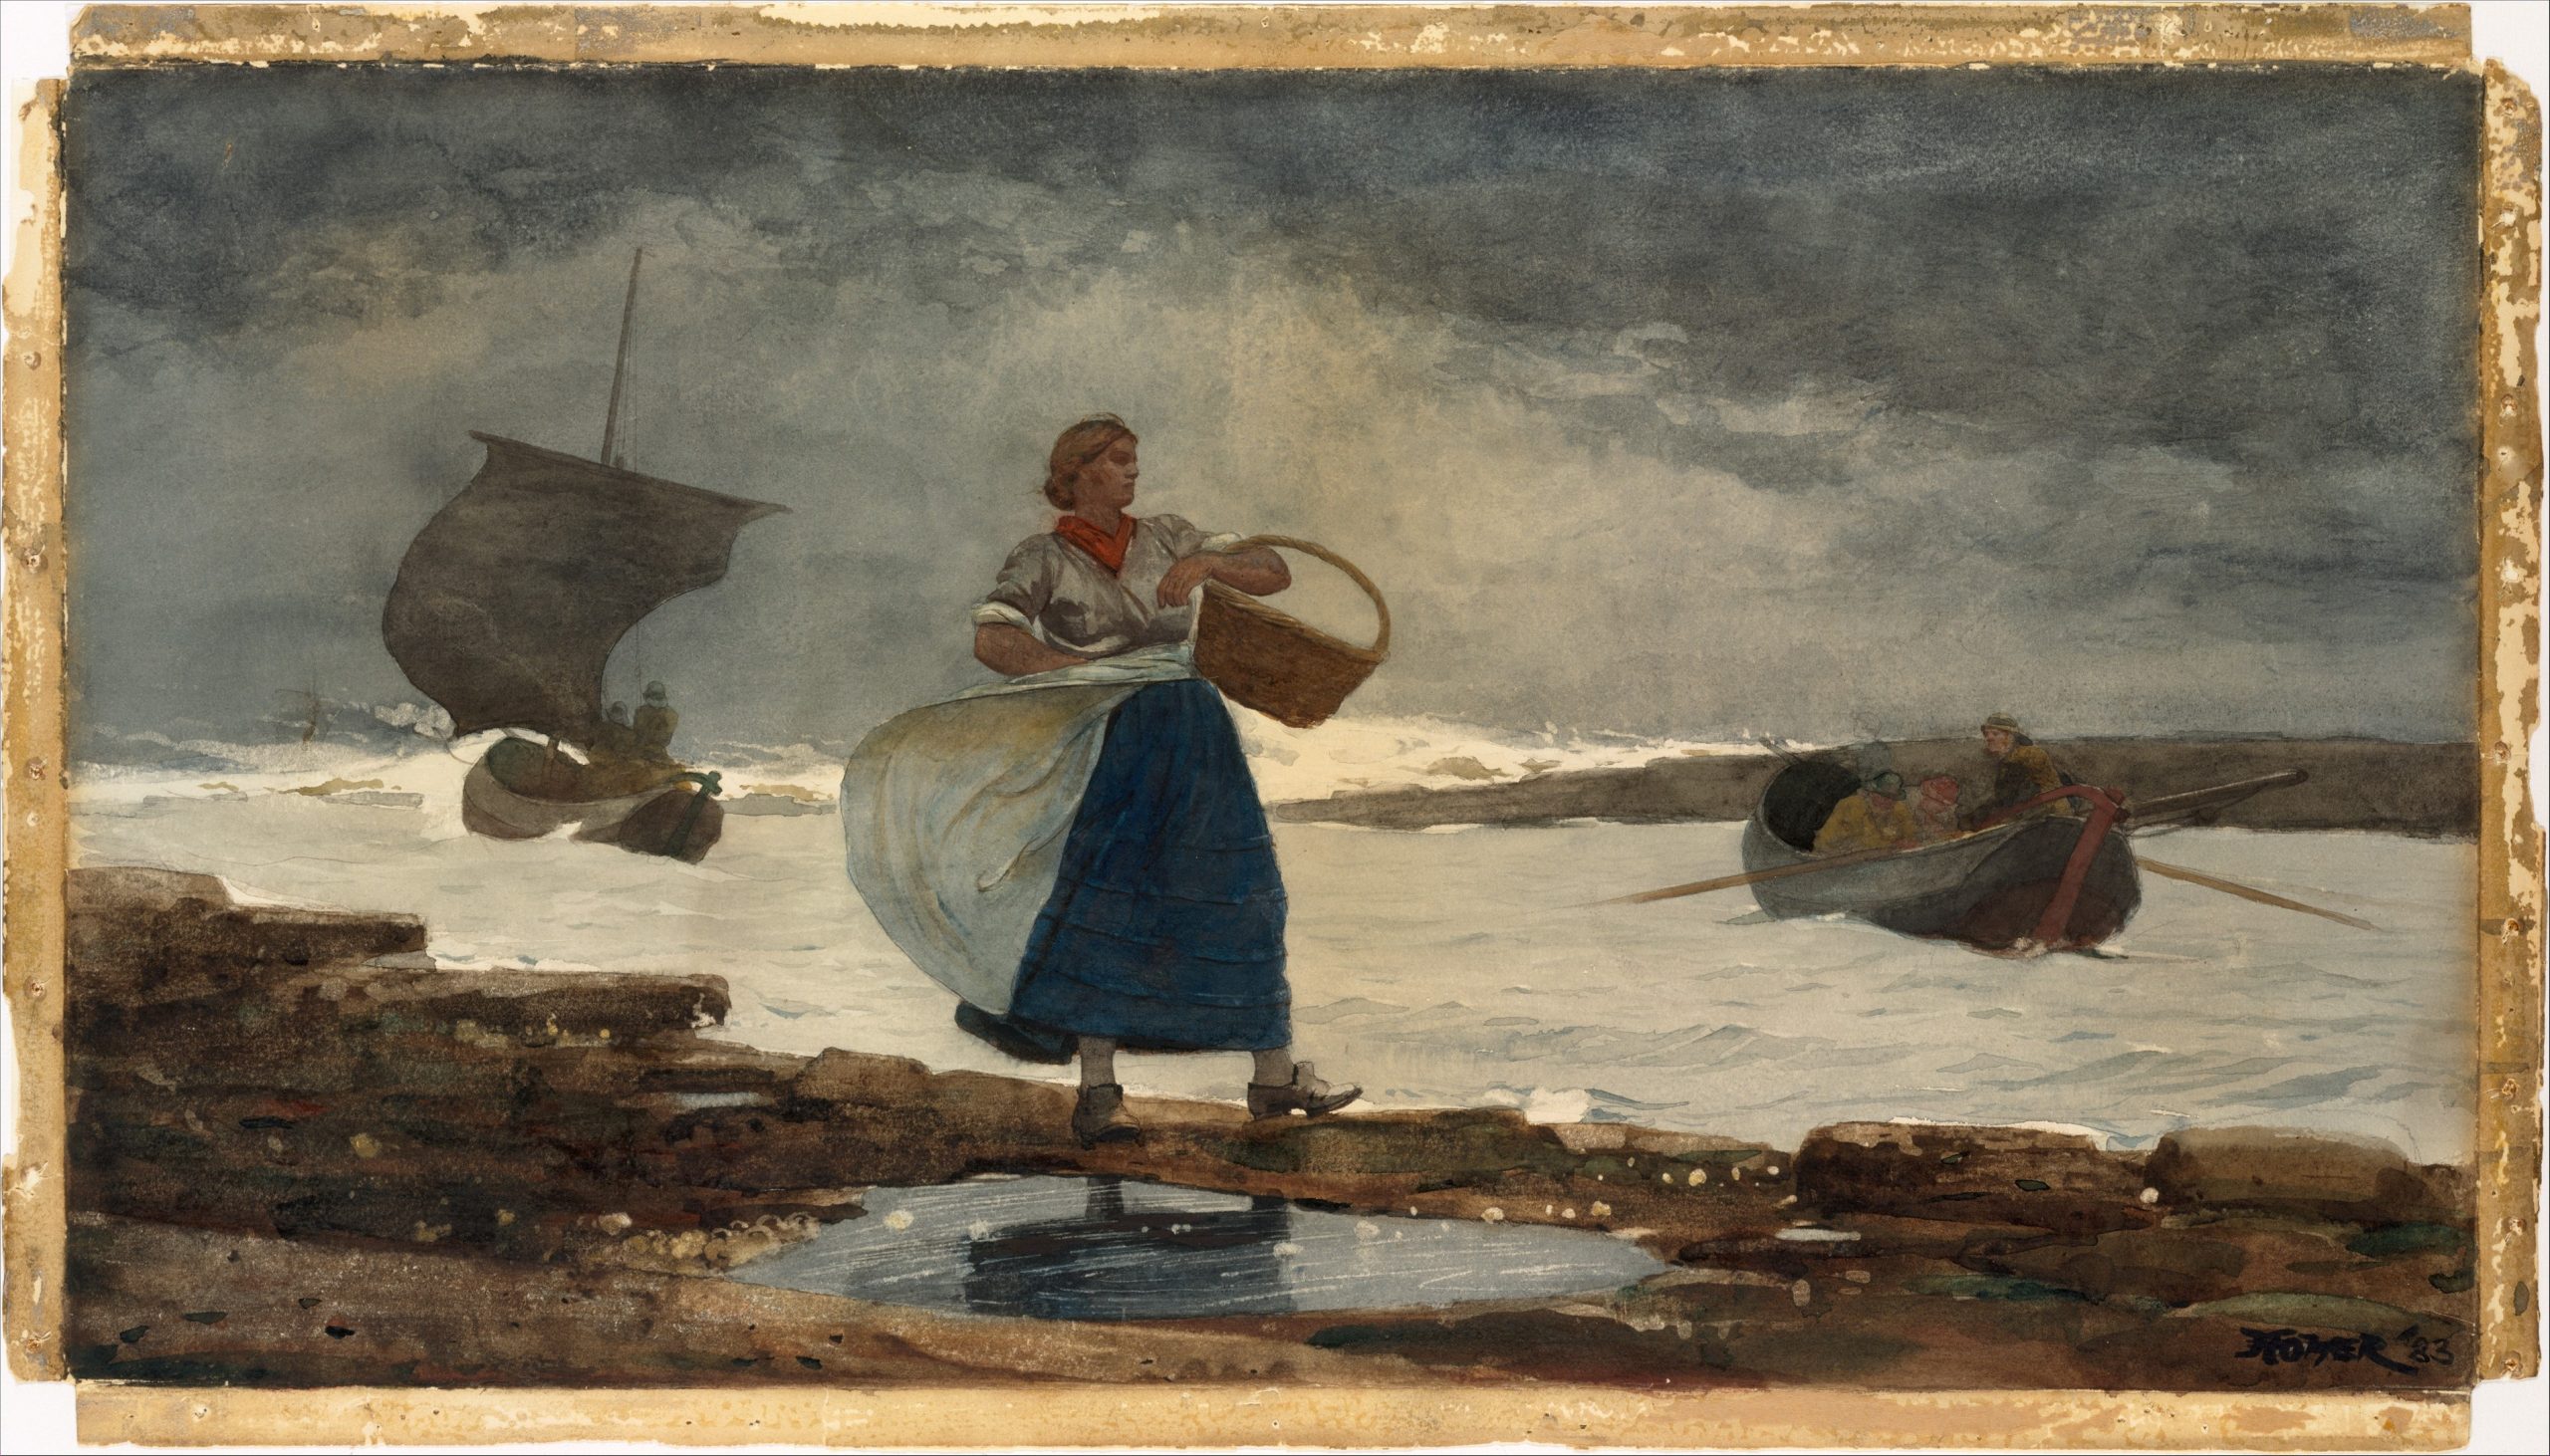 A woman carrying a basket standing by a rocky shoreline with boats in the background